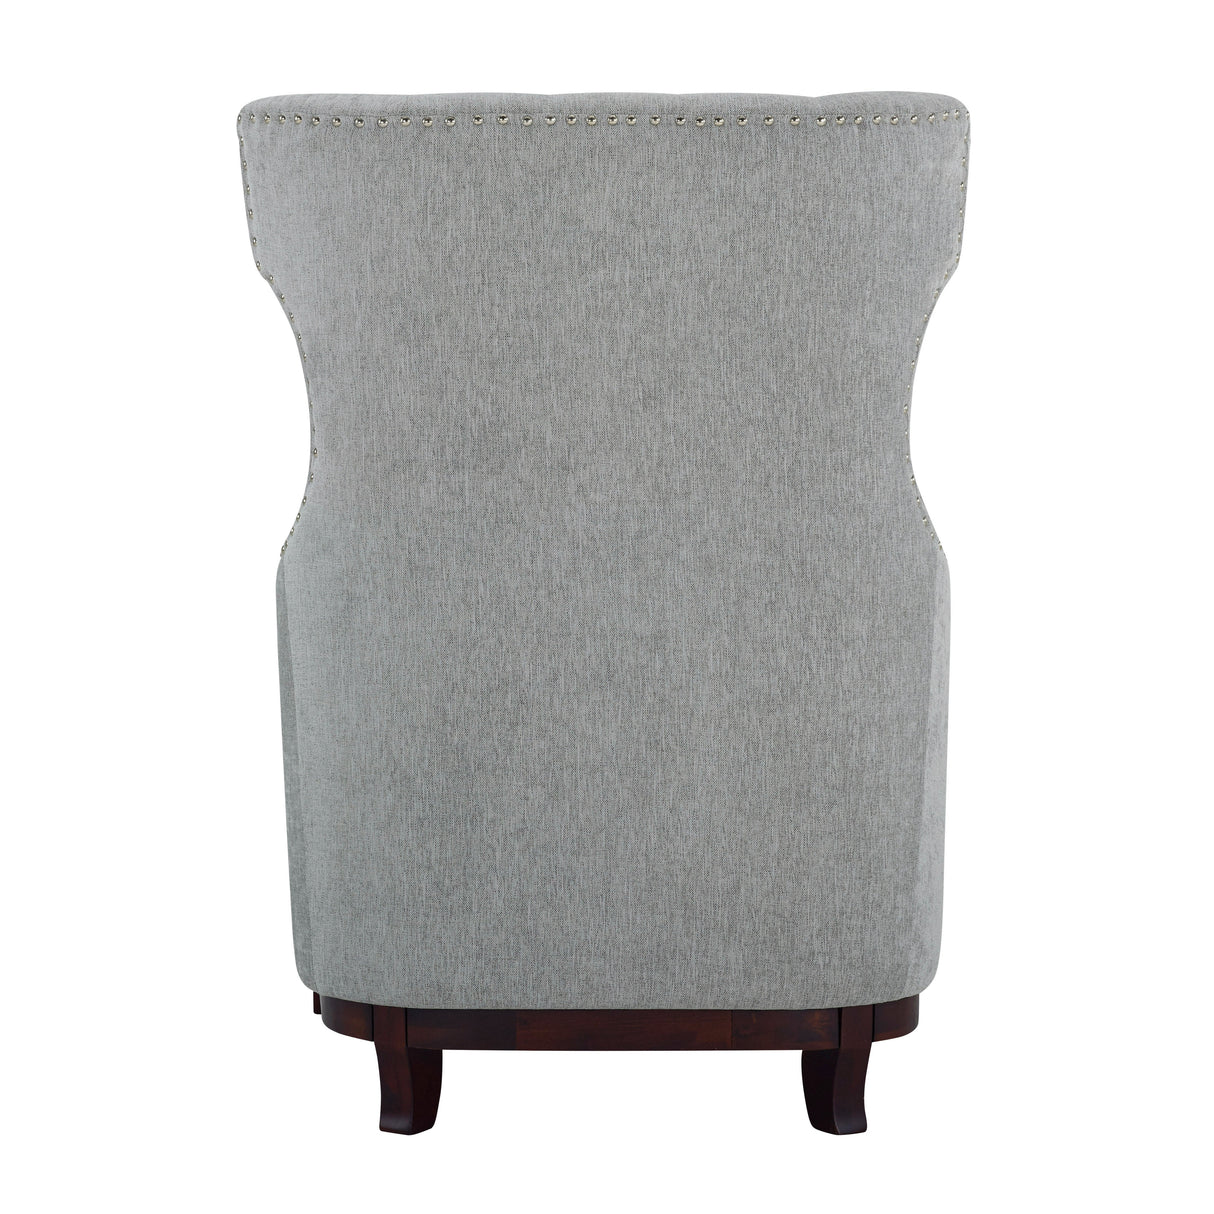 Adriano Light Gray Accent Chair